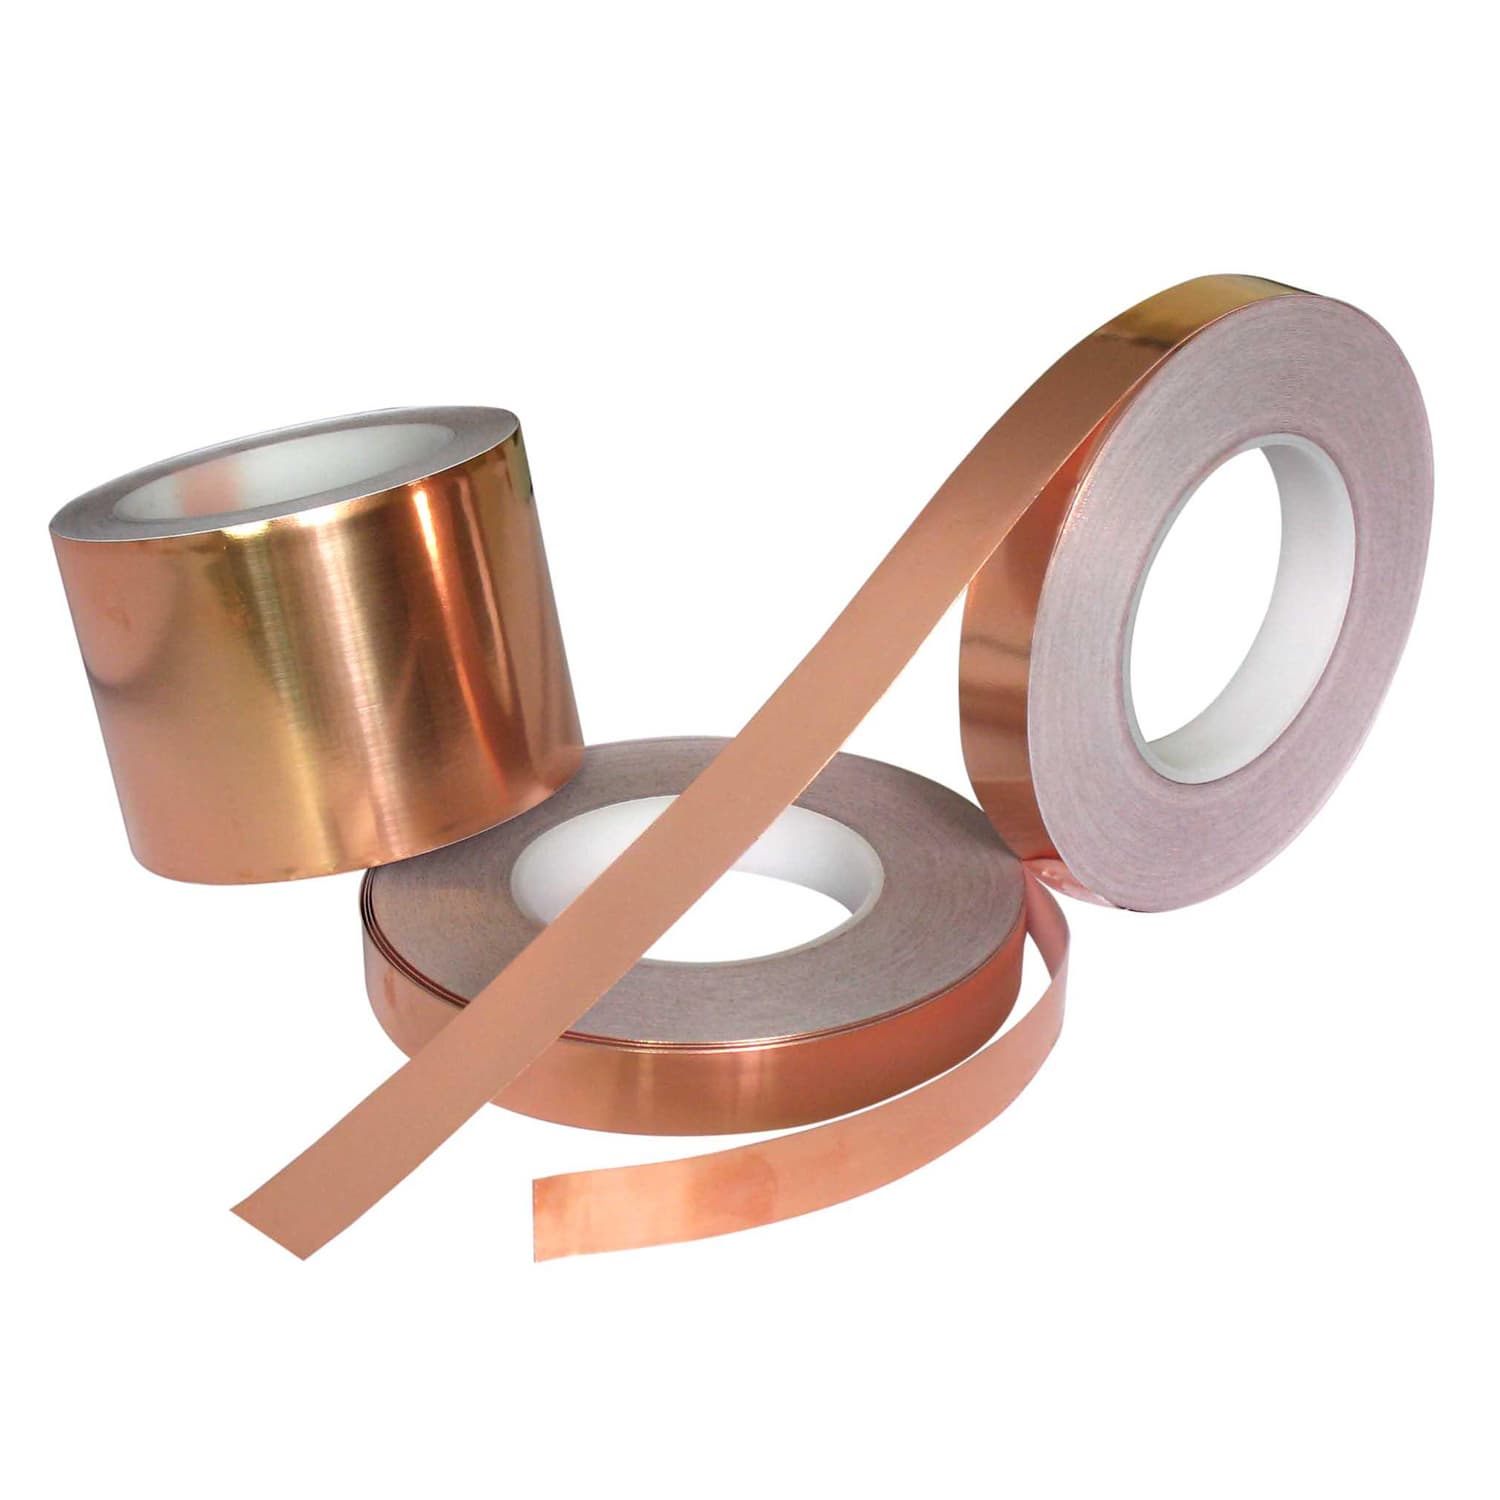 acrylic adhesive backed copper foil tape for shielding